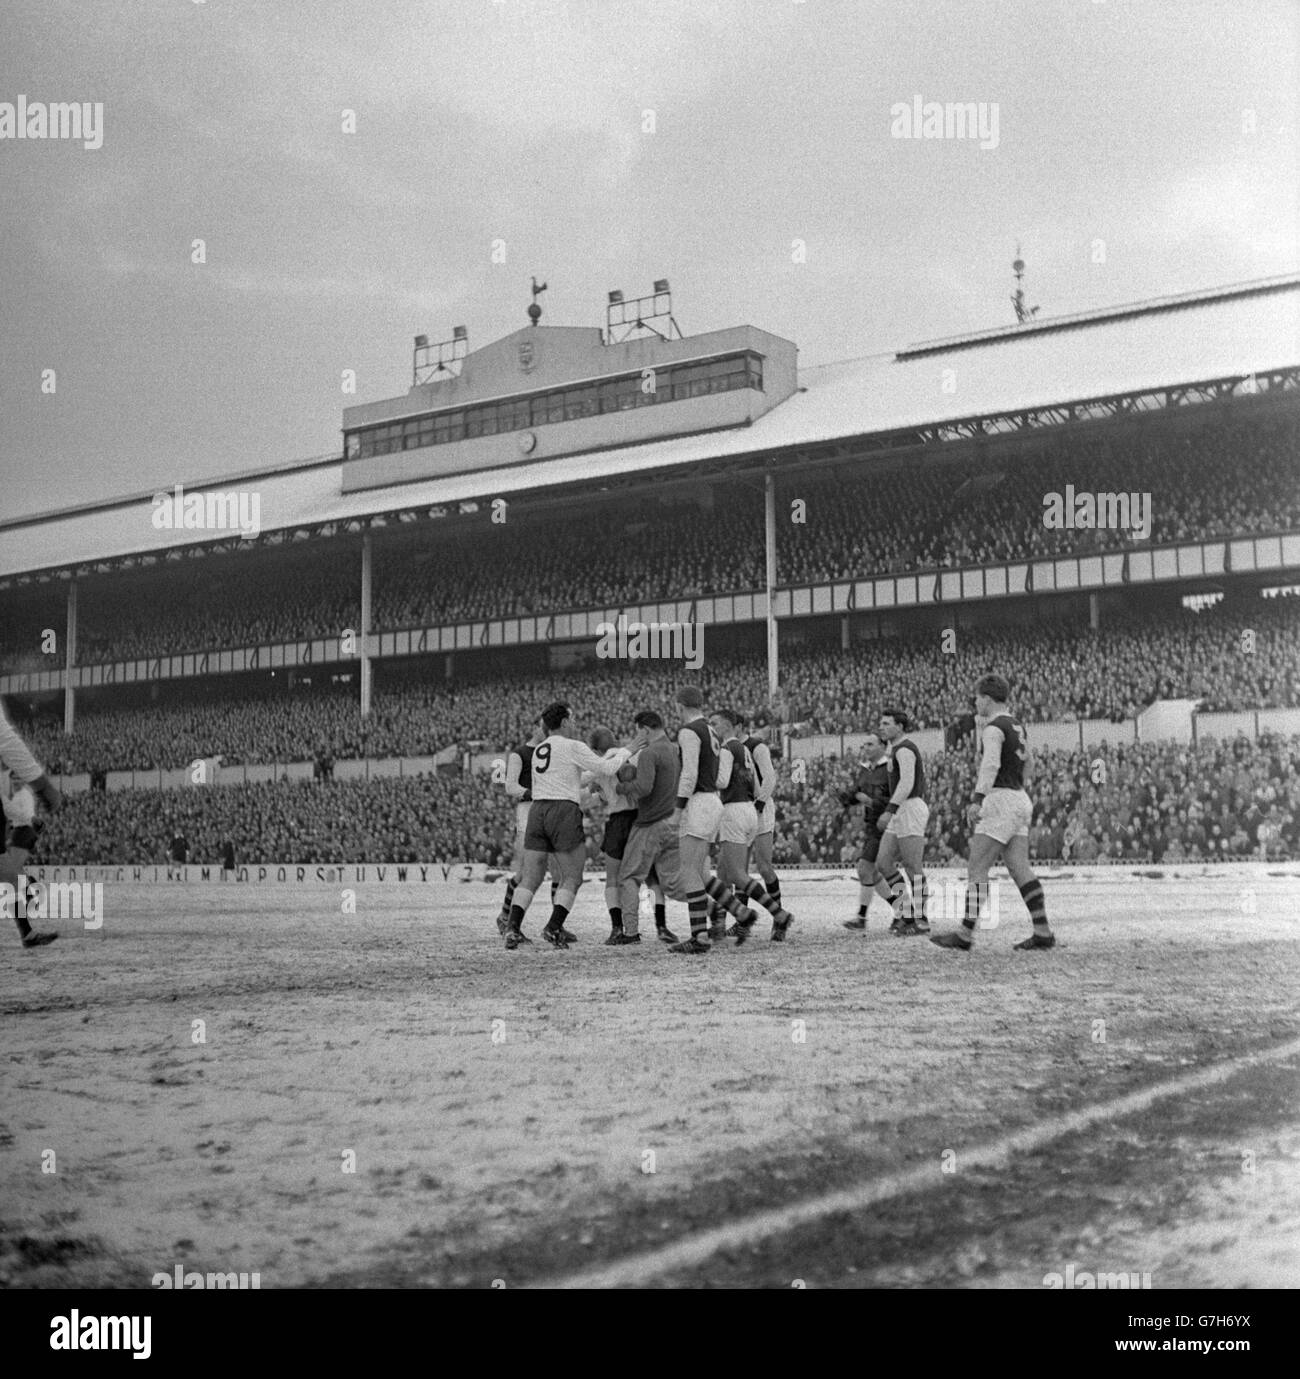 Referee R.T.E. Langdale (third from right) closes in on a group of players during a moment of tension in the FA Cup third round tie in the snow at White Hart Lane. According to an unnamed eyewitness, Tottenham Hotspur outside-left Terry Dyson (third from left) ruffled Burnley players because of persistently trying to kick the ball while it was still in the grasp of Burnley goalkeeper Adam Blacklaw (fourth from left). Emotions ran high, but it didn't help Spursas they were beaten 3-0 by Burnley. Stock Photo